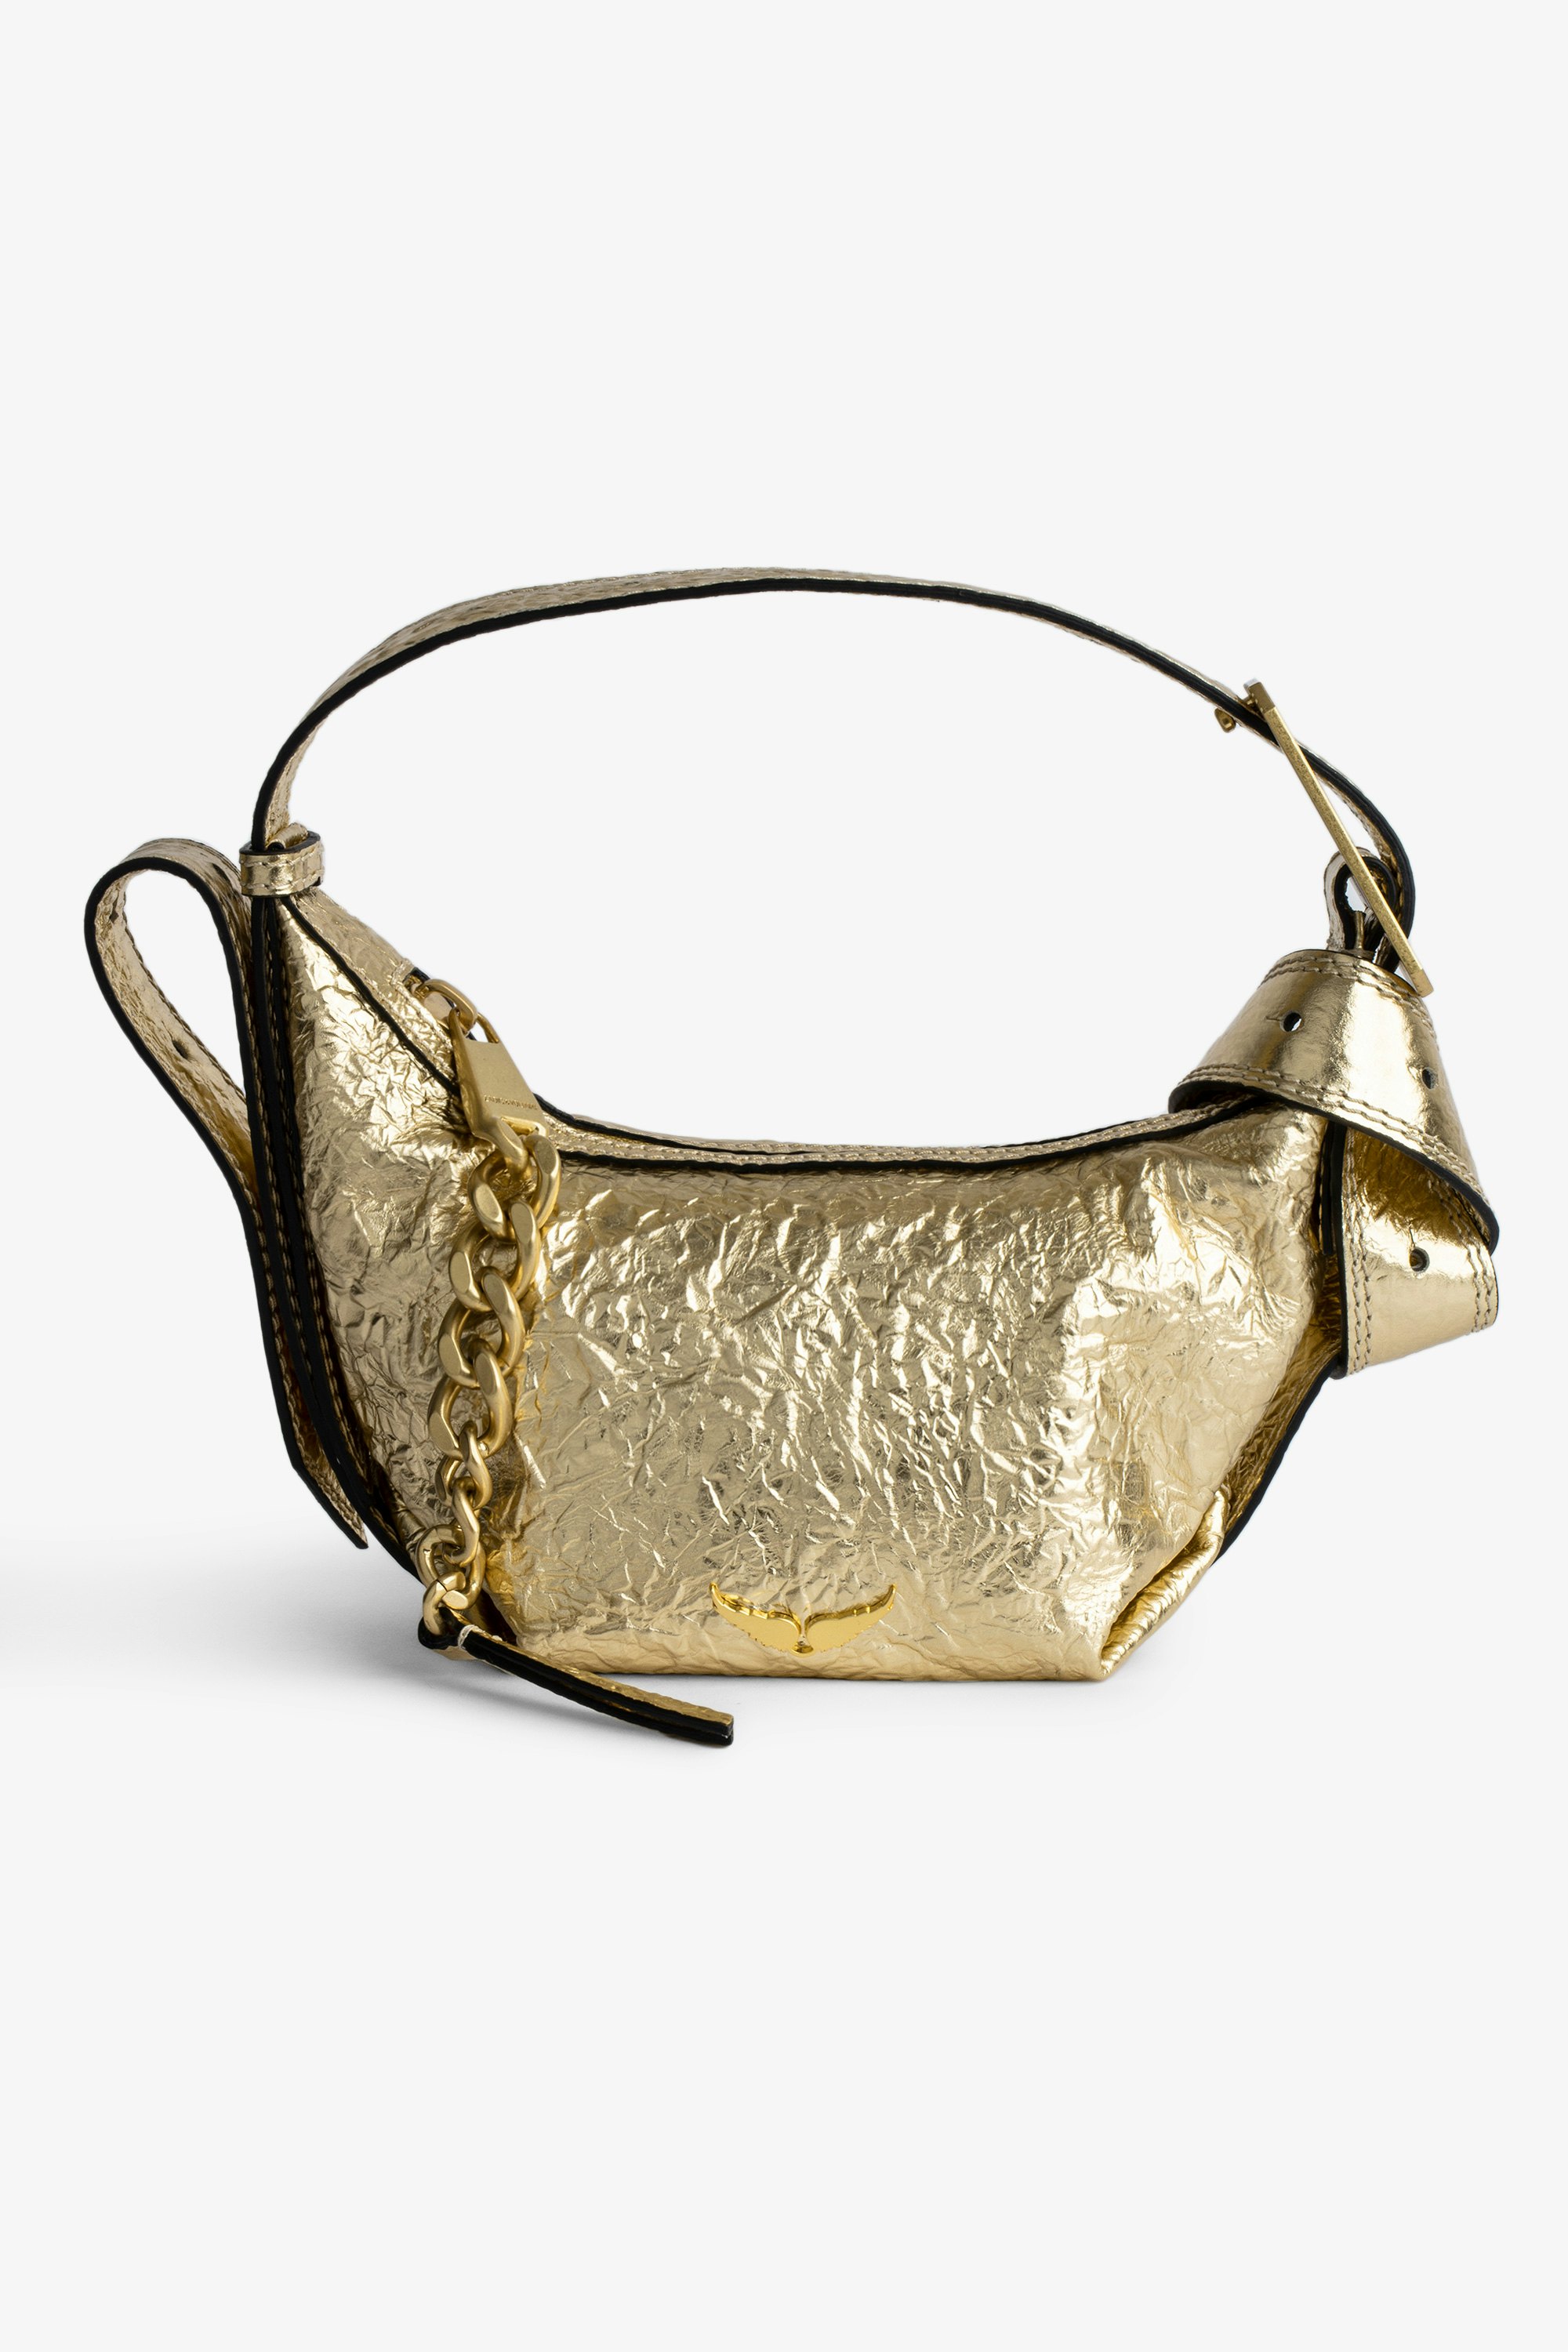 Le Cecilia XS Wrinkled Metal Bag Women’s Le Cecilia small bag in metallic gold crinkled leather